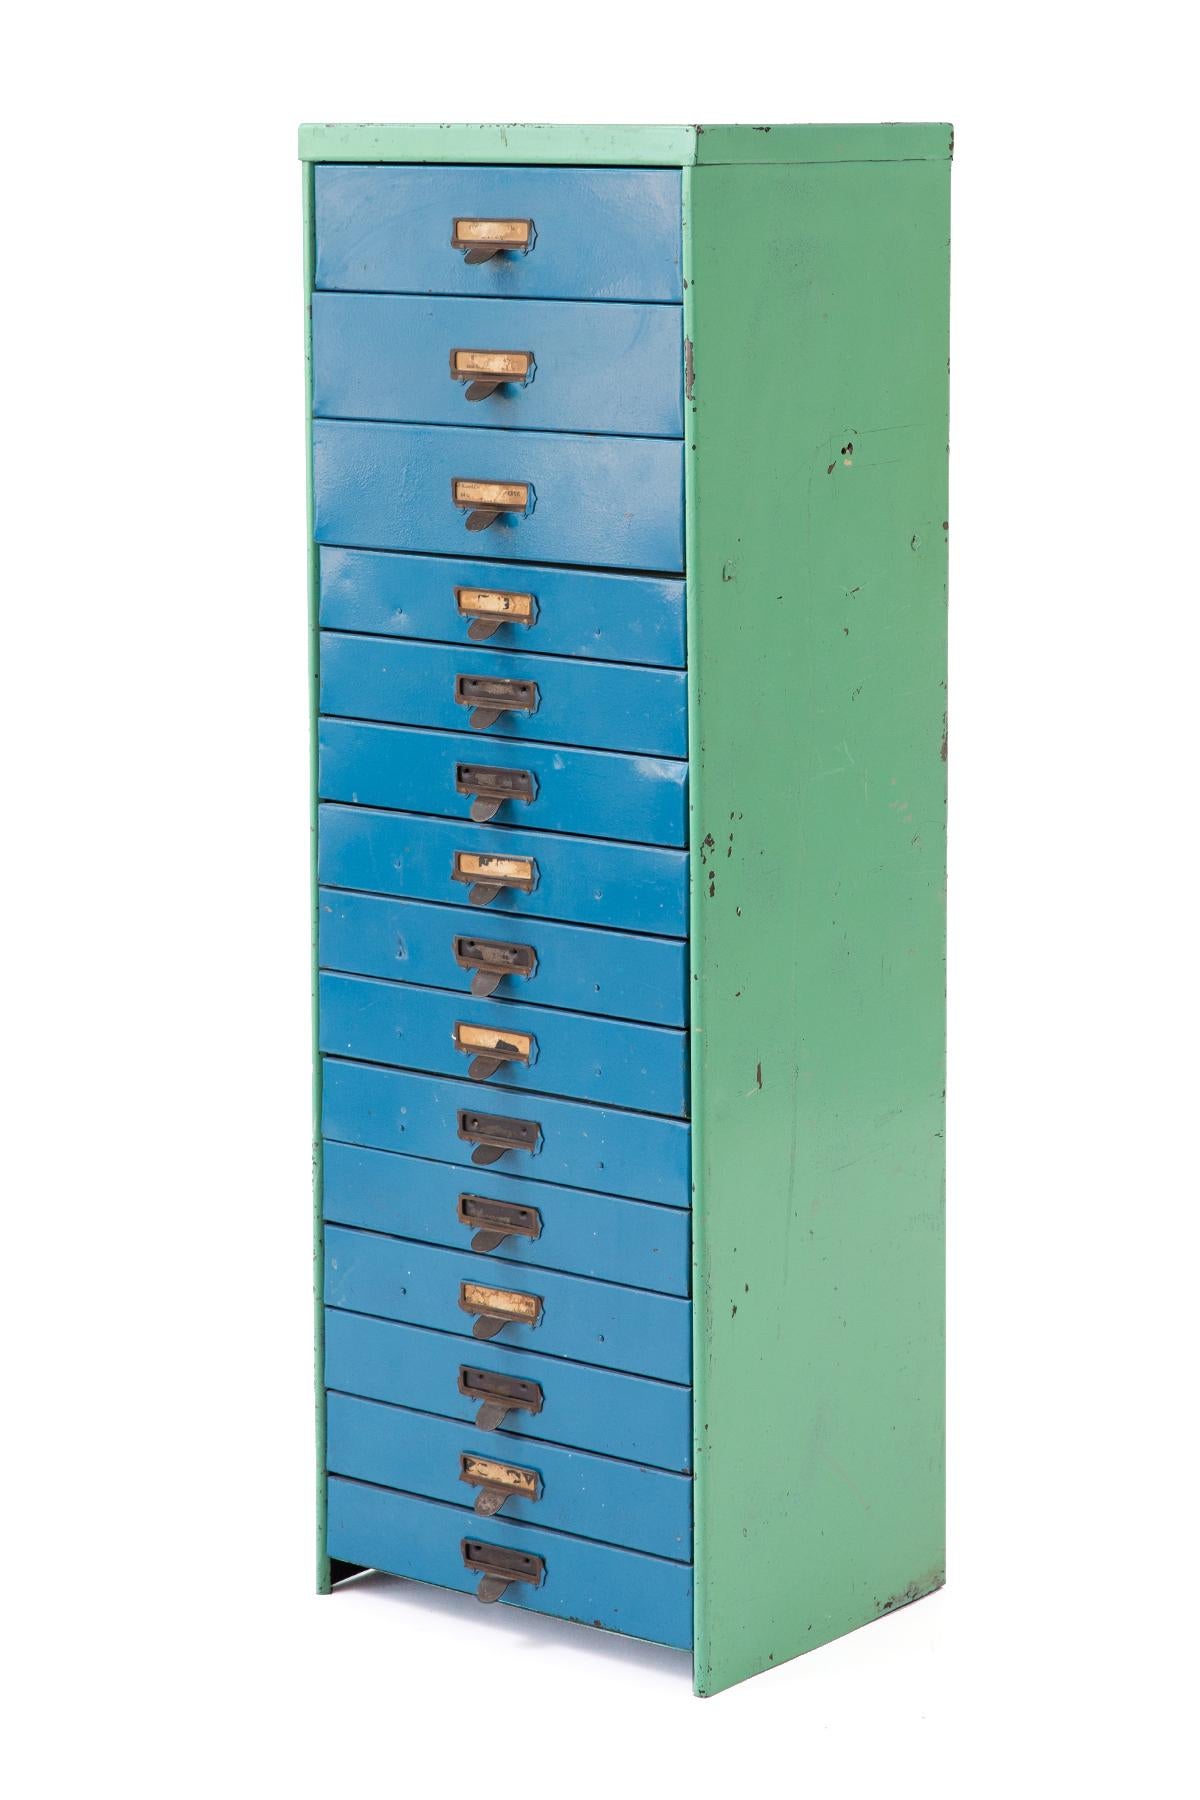 This eye-catching industrial metal slide cabinet from the 40s features beautiful patinated sea-foam green sides, turquoise drawer fronts and copper pulls.